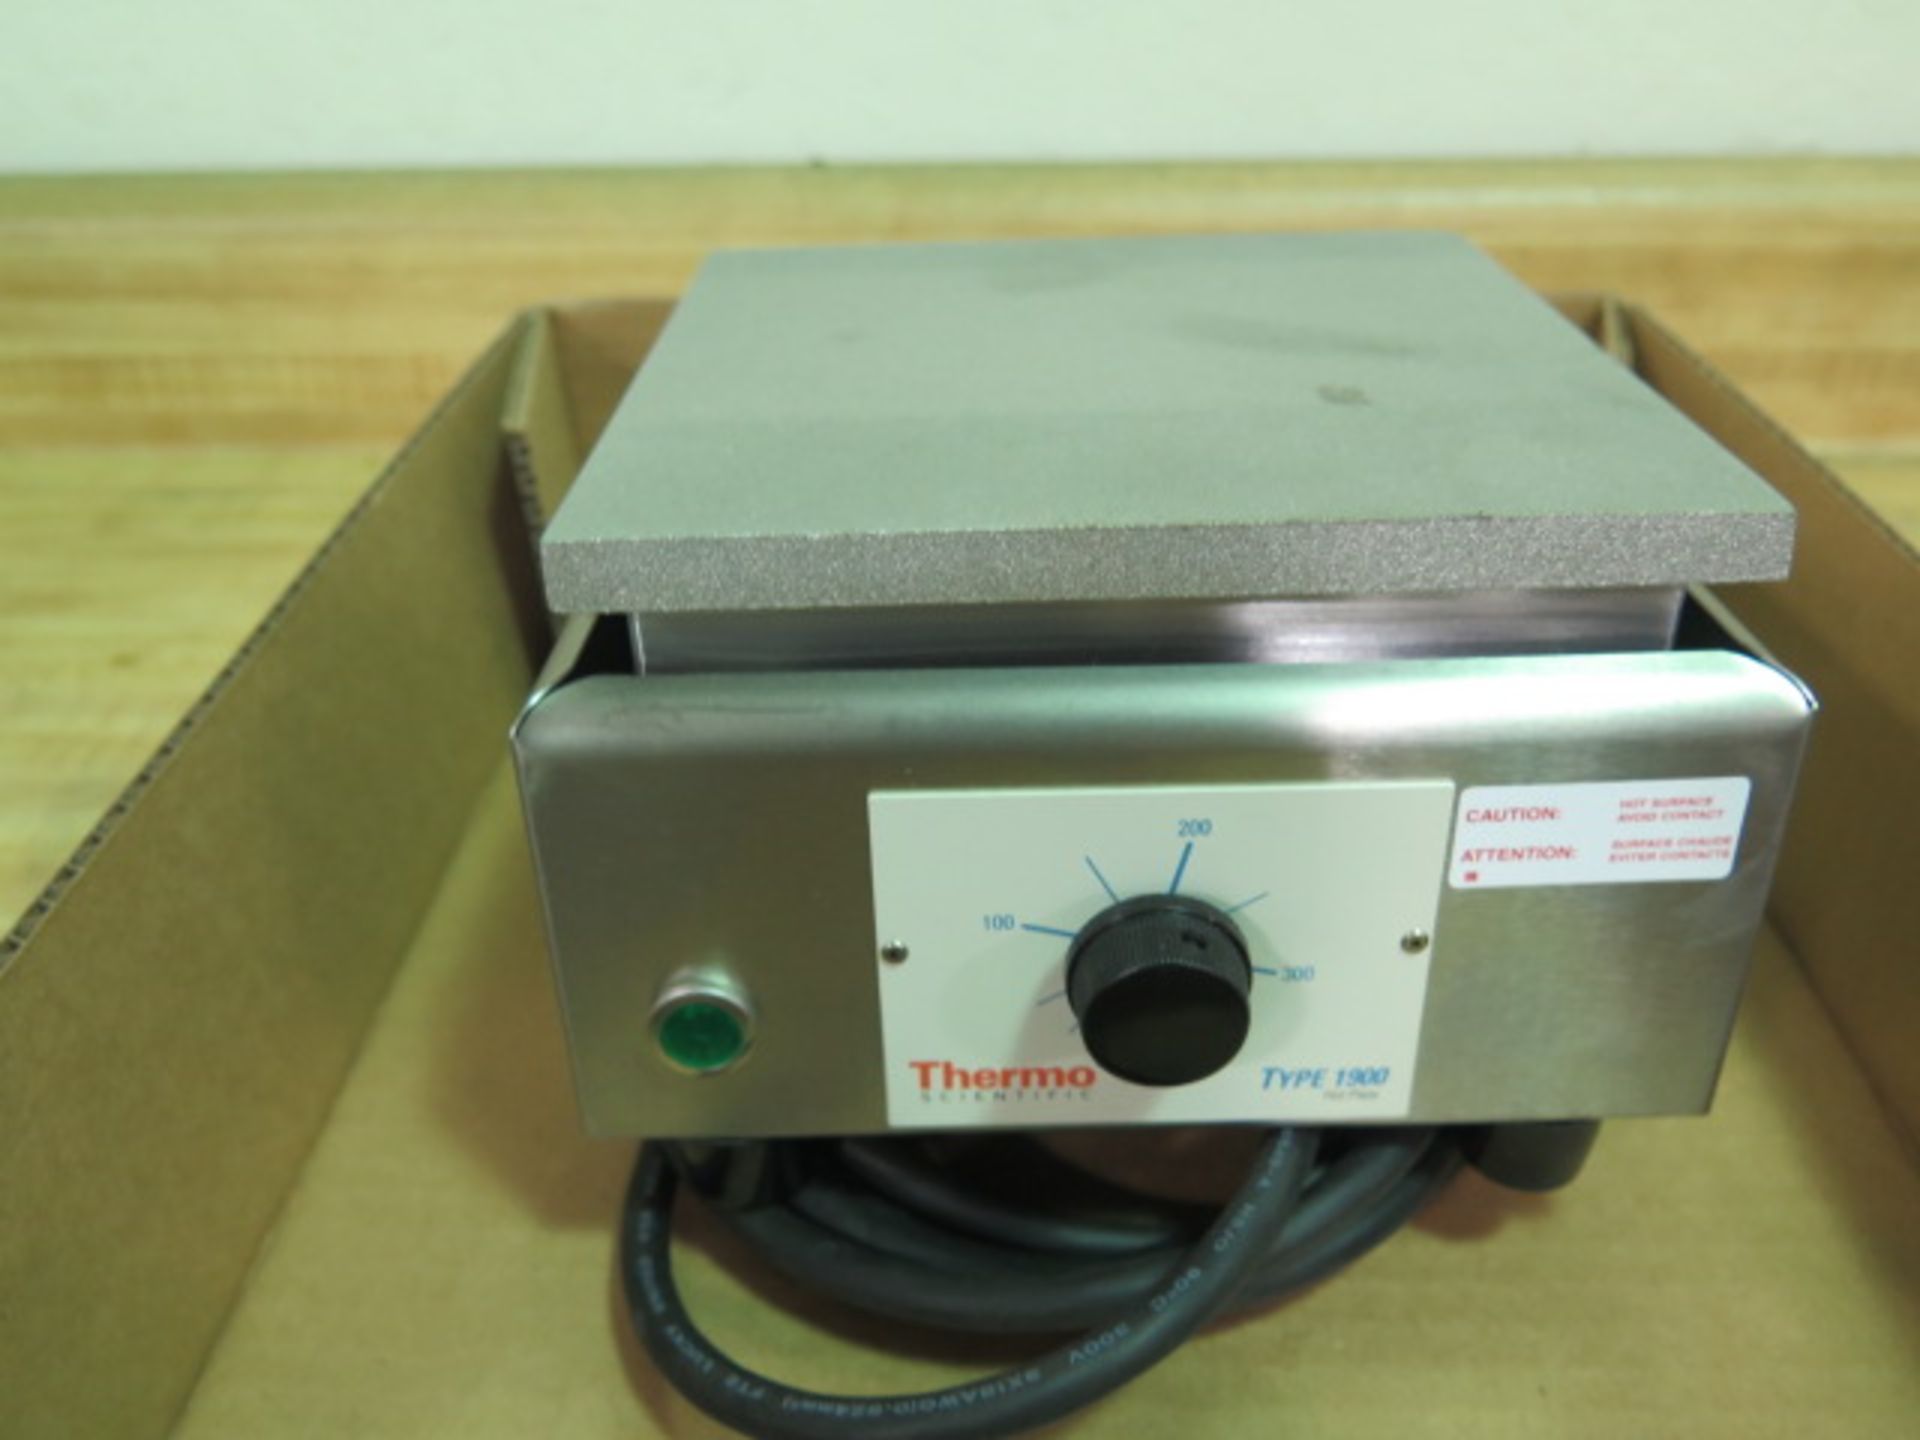 Thermo Scientific mdl. 1900 Hot Plate - Image 2 of 2